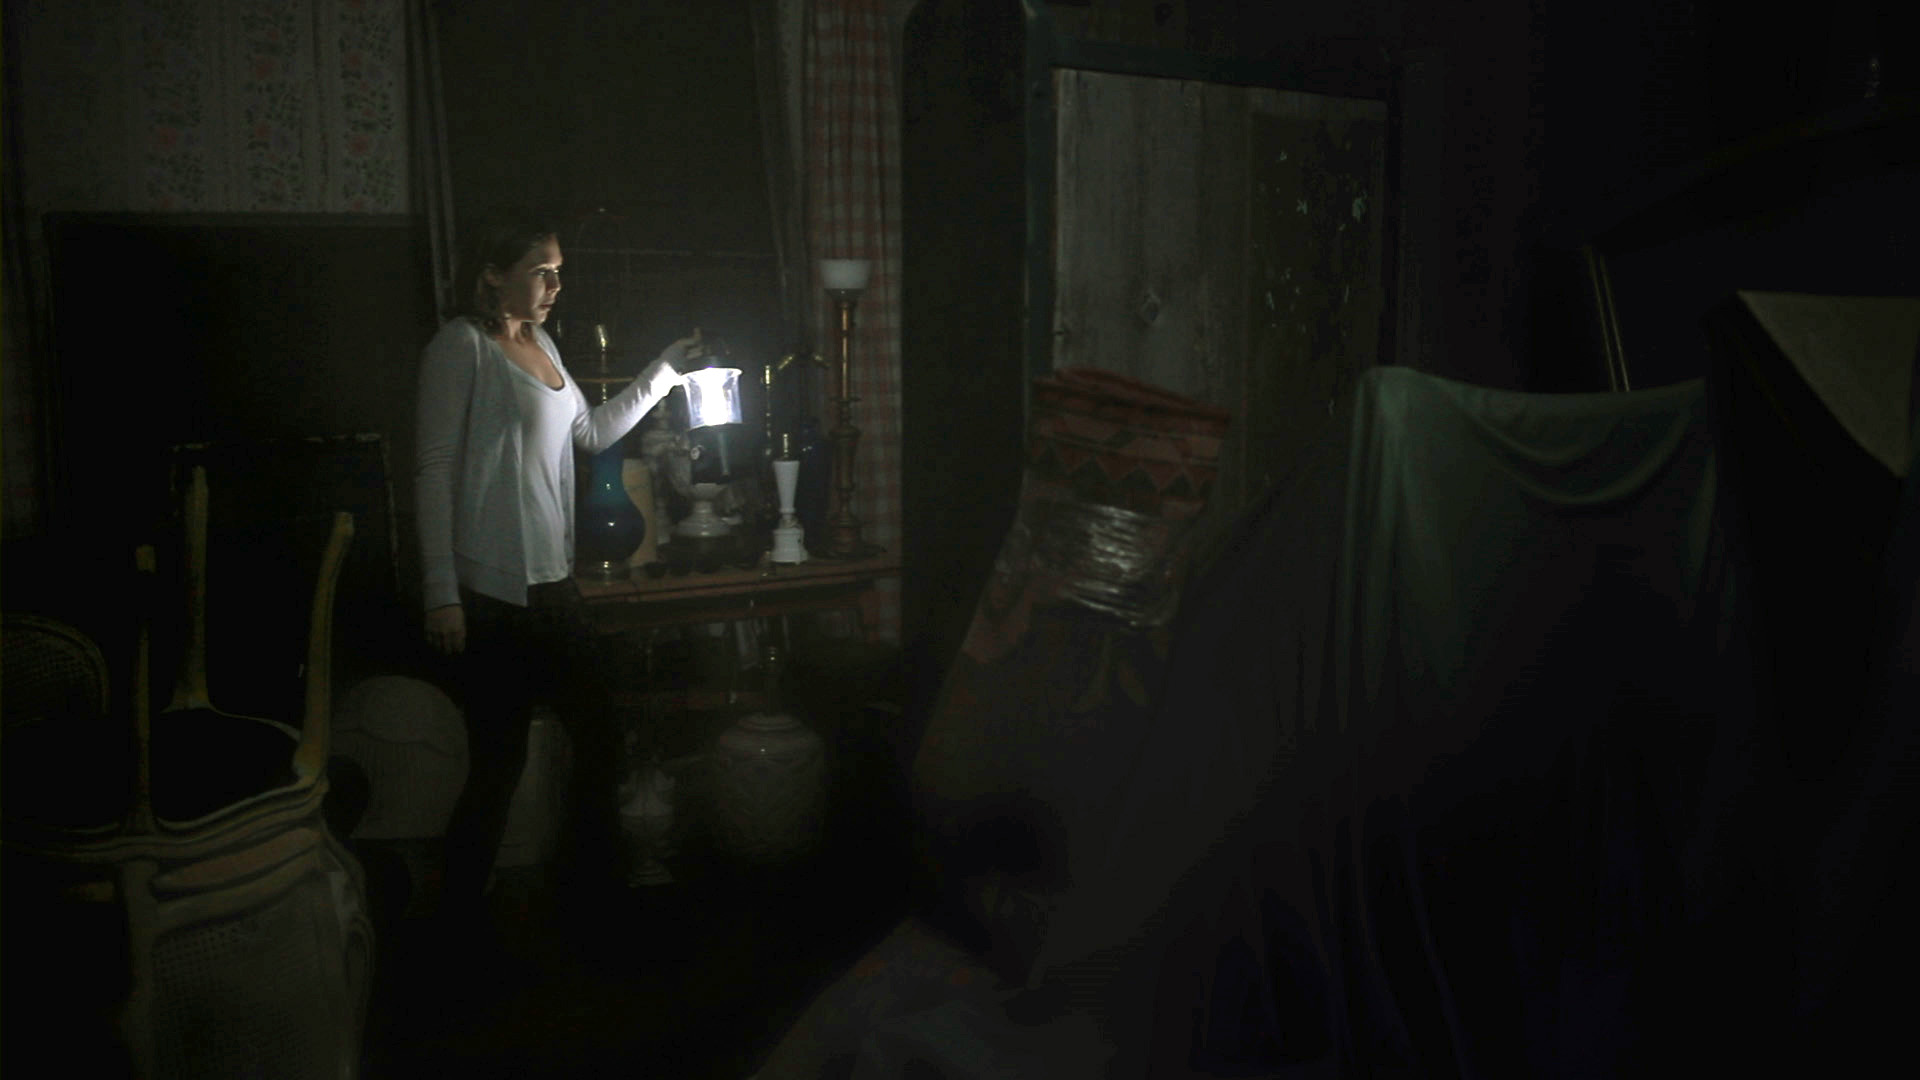 The Unsettling Horror Of Silent House Scrink